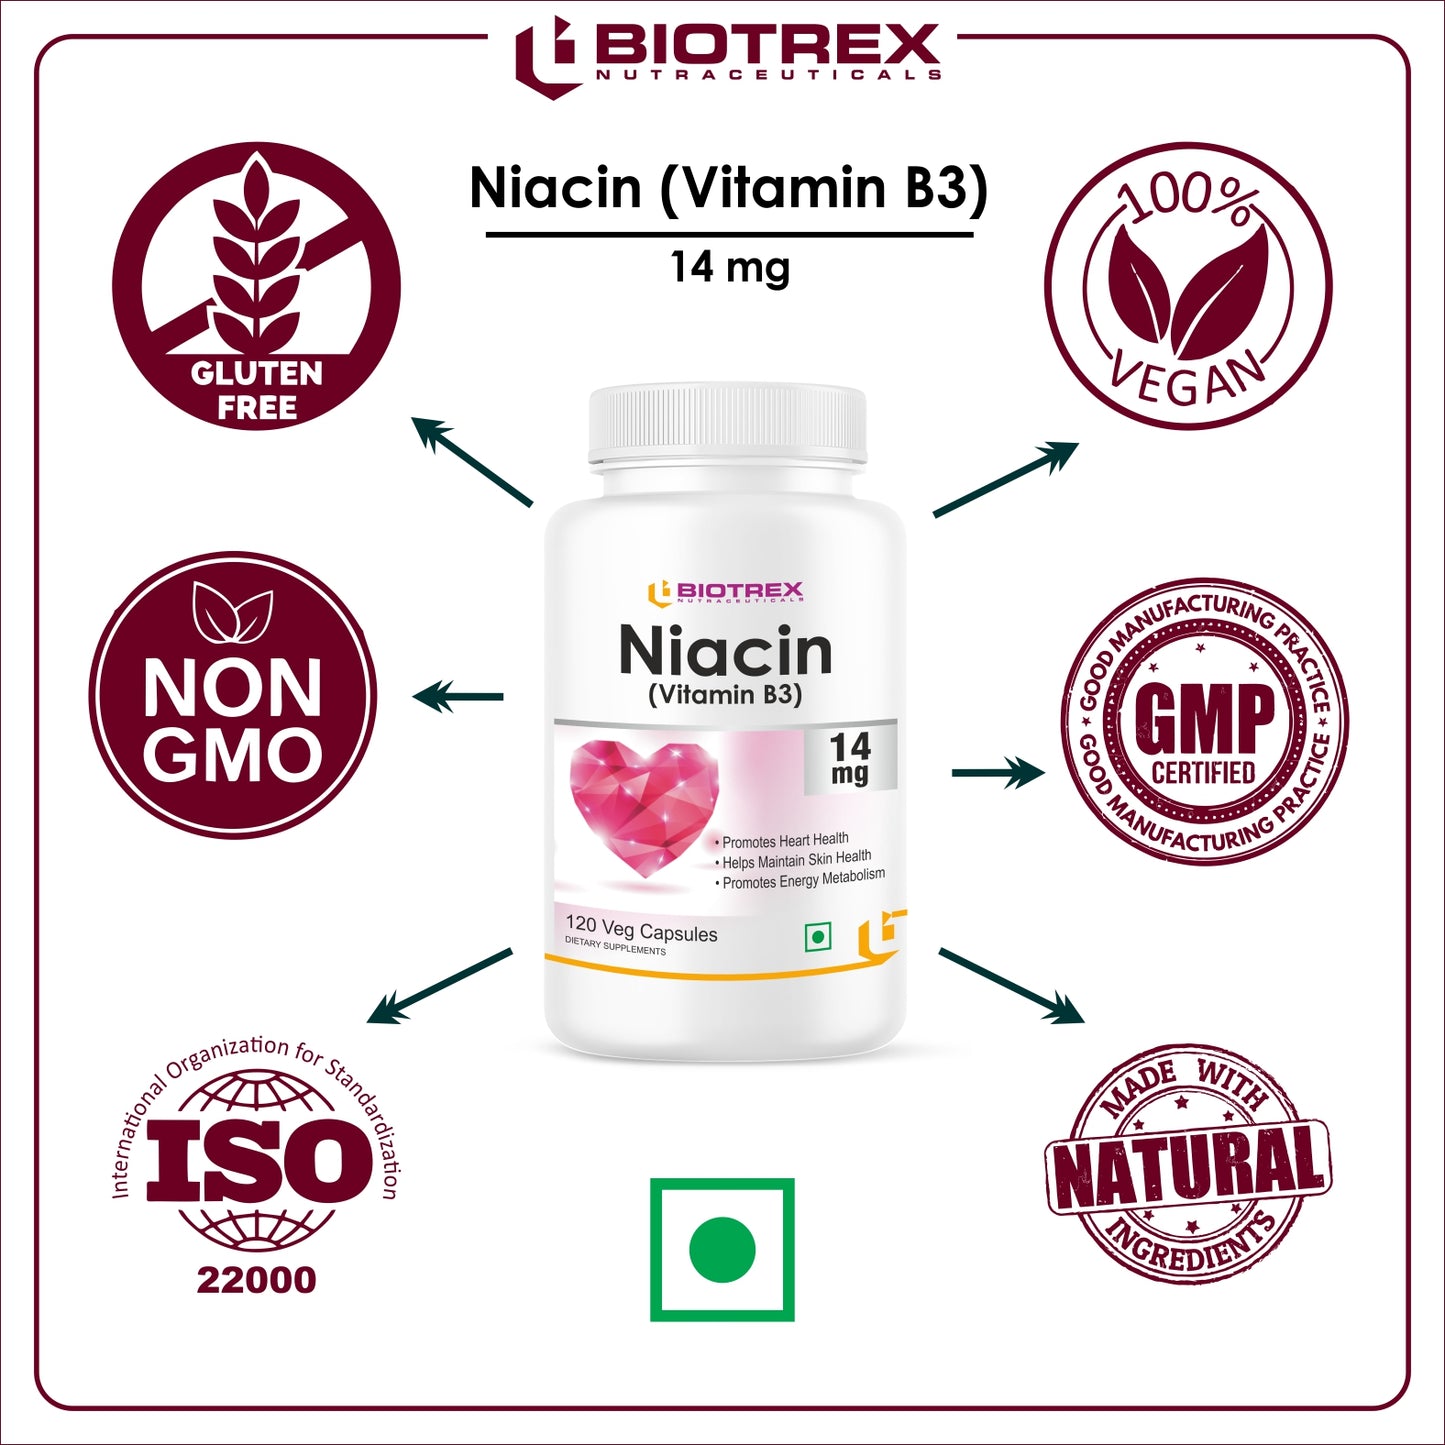 Biotrex Nutraceuticals Niacin 14mg Vitamin B3 With Inositol 50mg Supplement | for Vascularity & Increase Cellular Energy, Non-GMO, Gluten Free, As Per RDA Allowance - 120 Veg Capsules